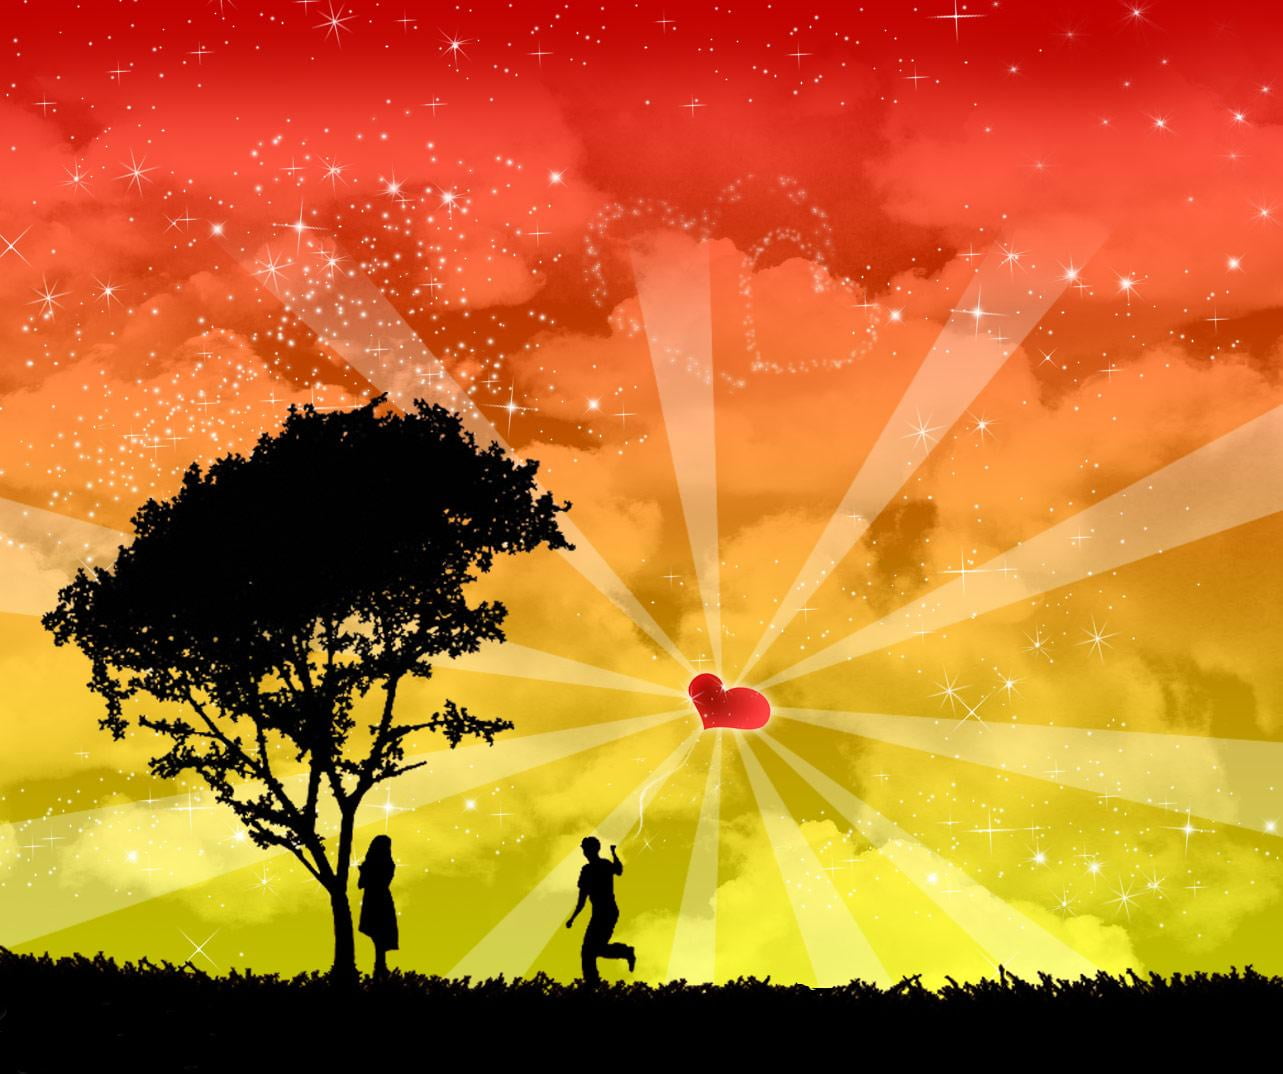 silhouette of man and woman artwork, vector, illustration, backgrounds